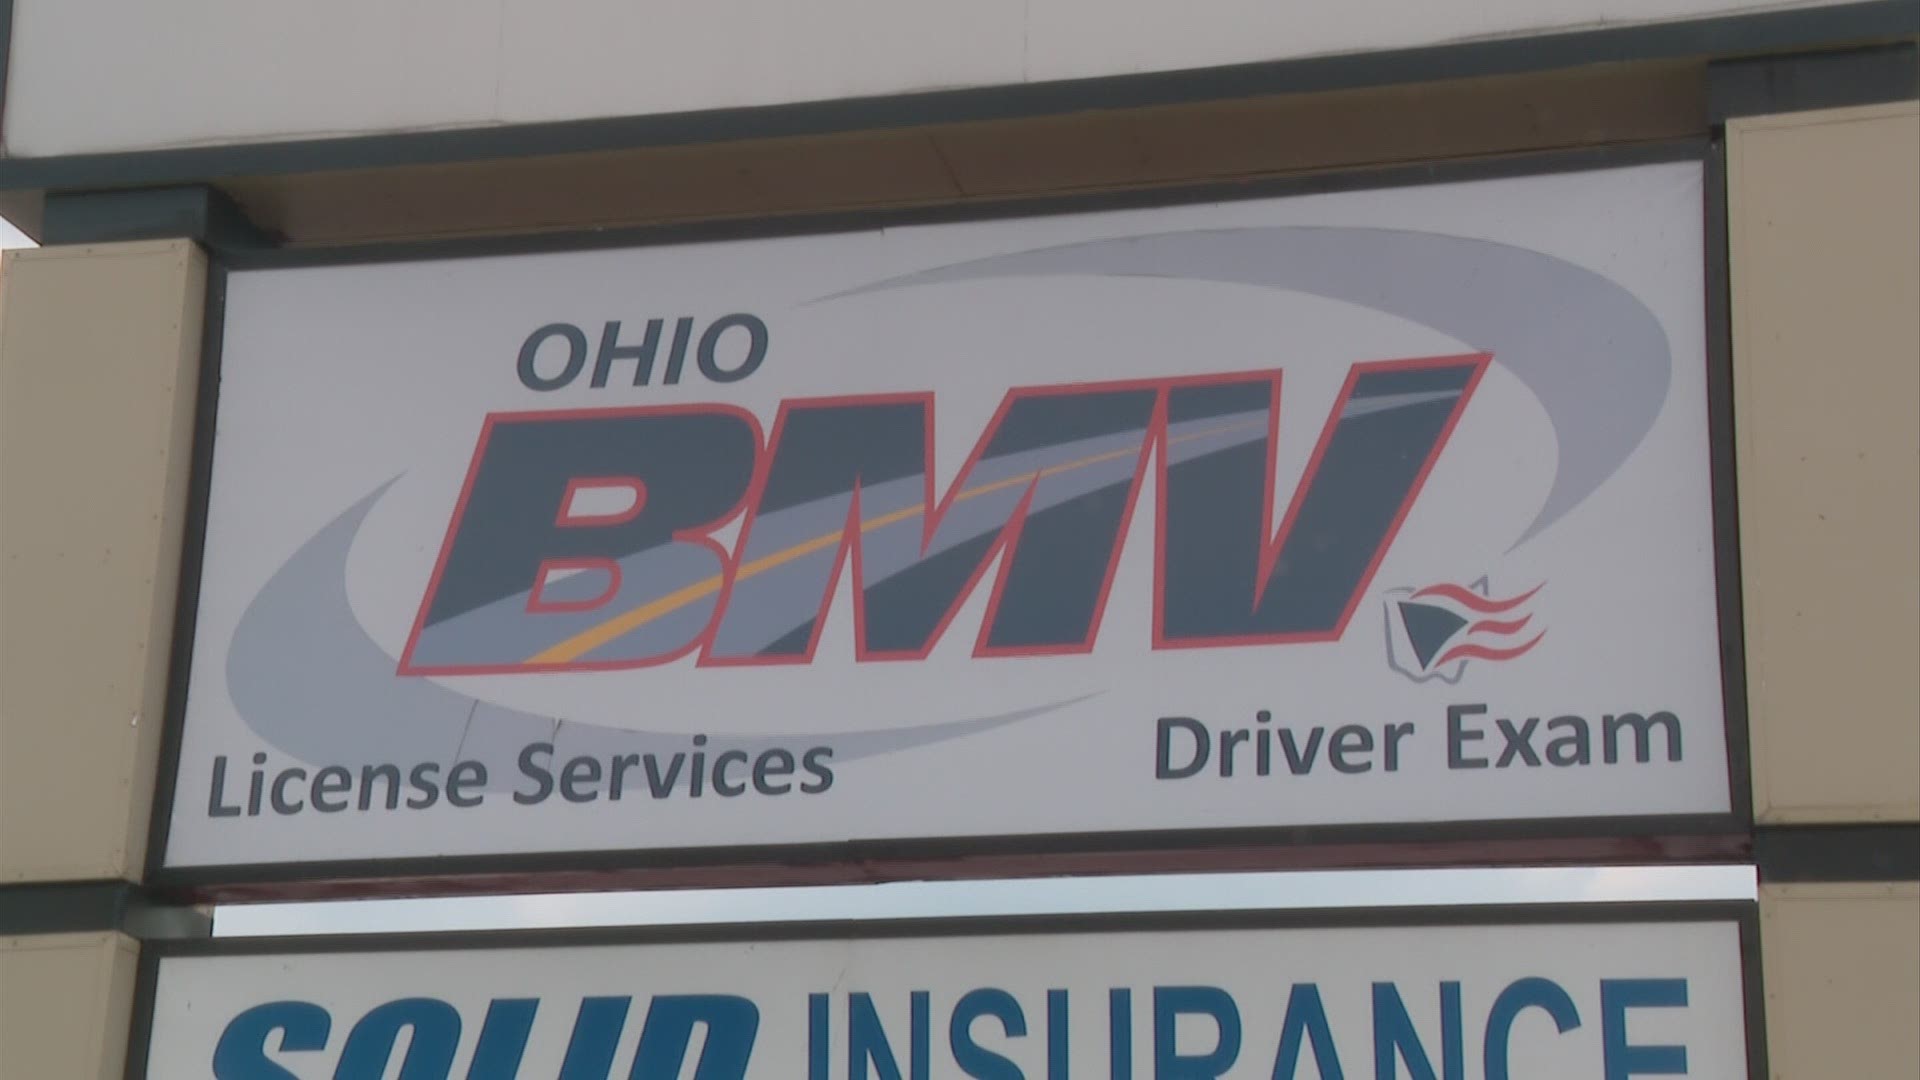 A 10 Investigates' review showed the Ohio BMV made more than $40 million last year selling personal information from driver and vehicle records to third parties.